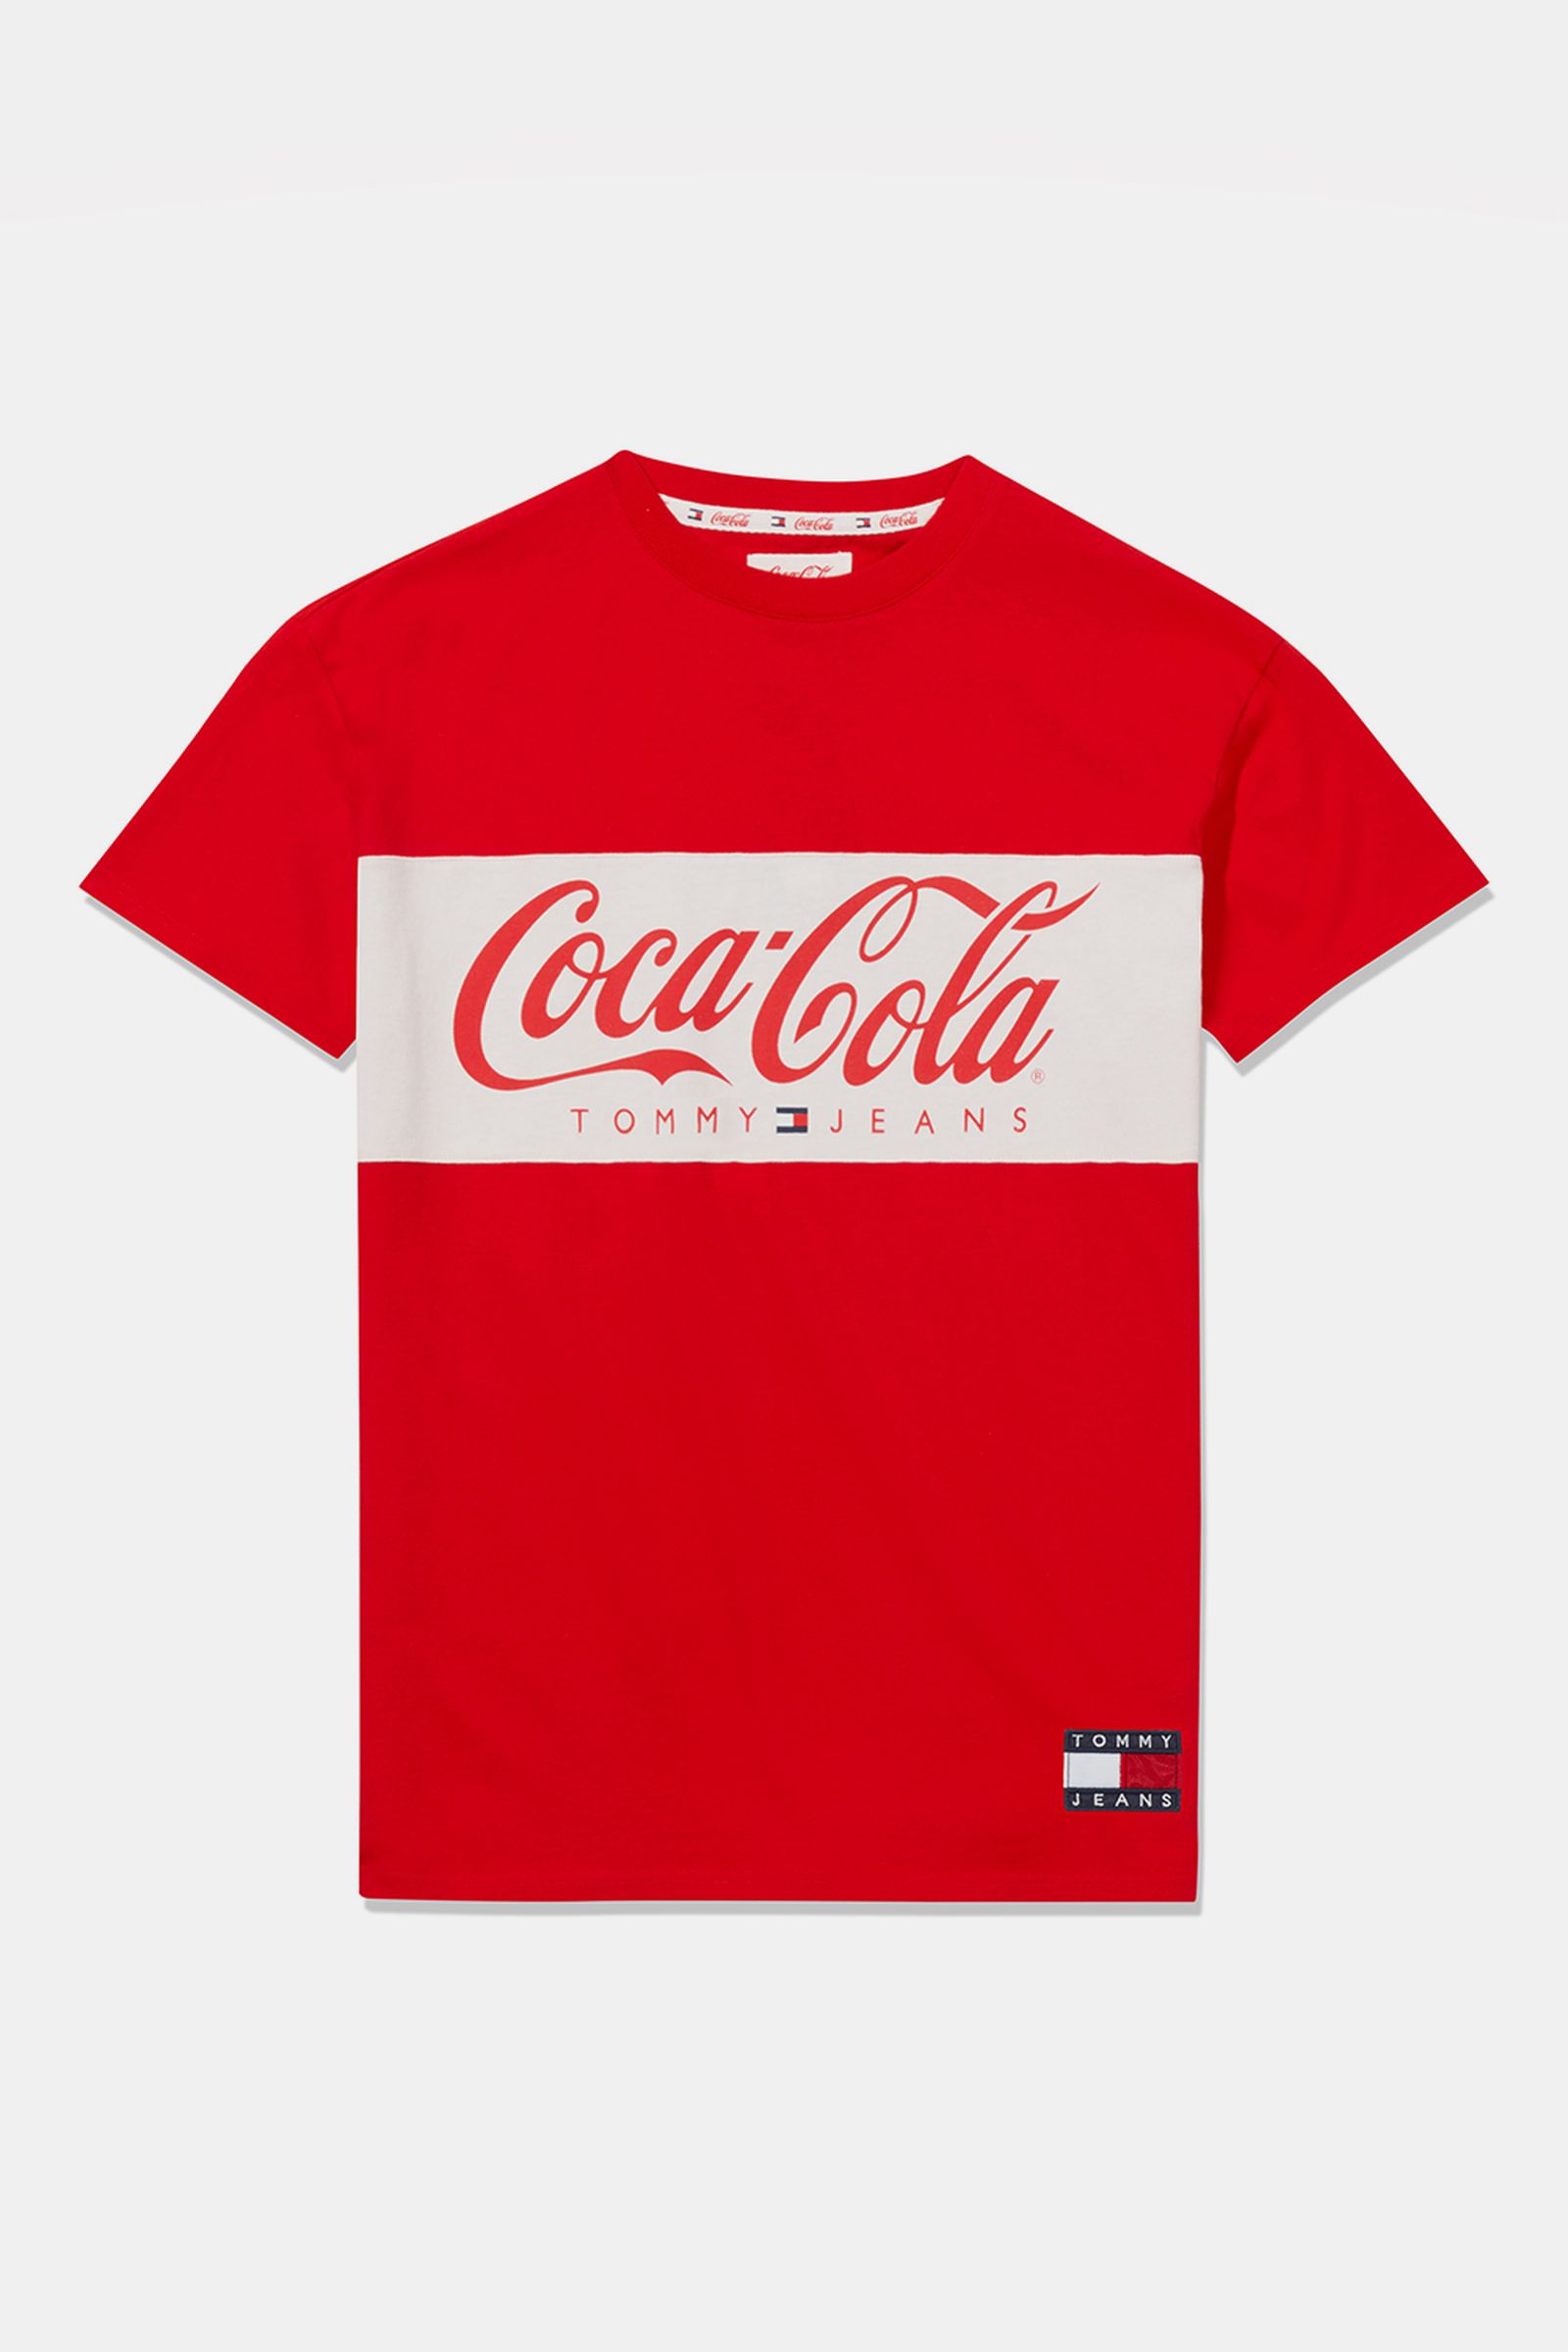 lb Spaceship Bloodstained Tommy Jeans x Coca-Cola SS19 Collection: Shop Here